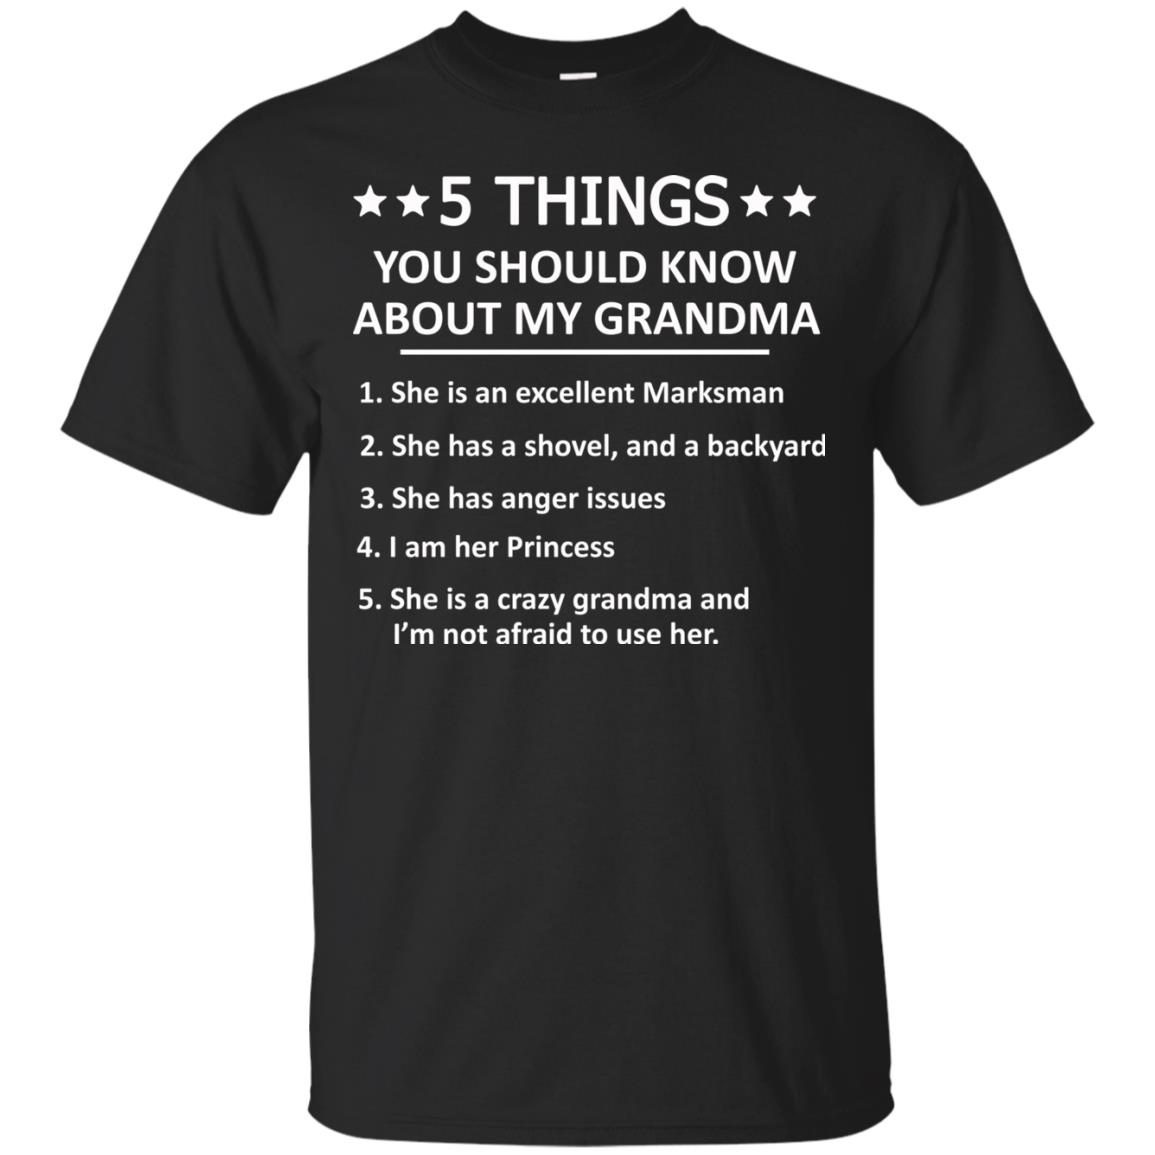 5 Things you should know about my Grandma t-shirt, hoodies, tank top